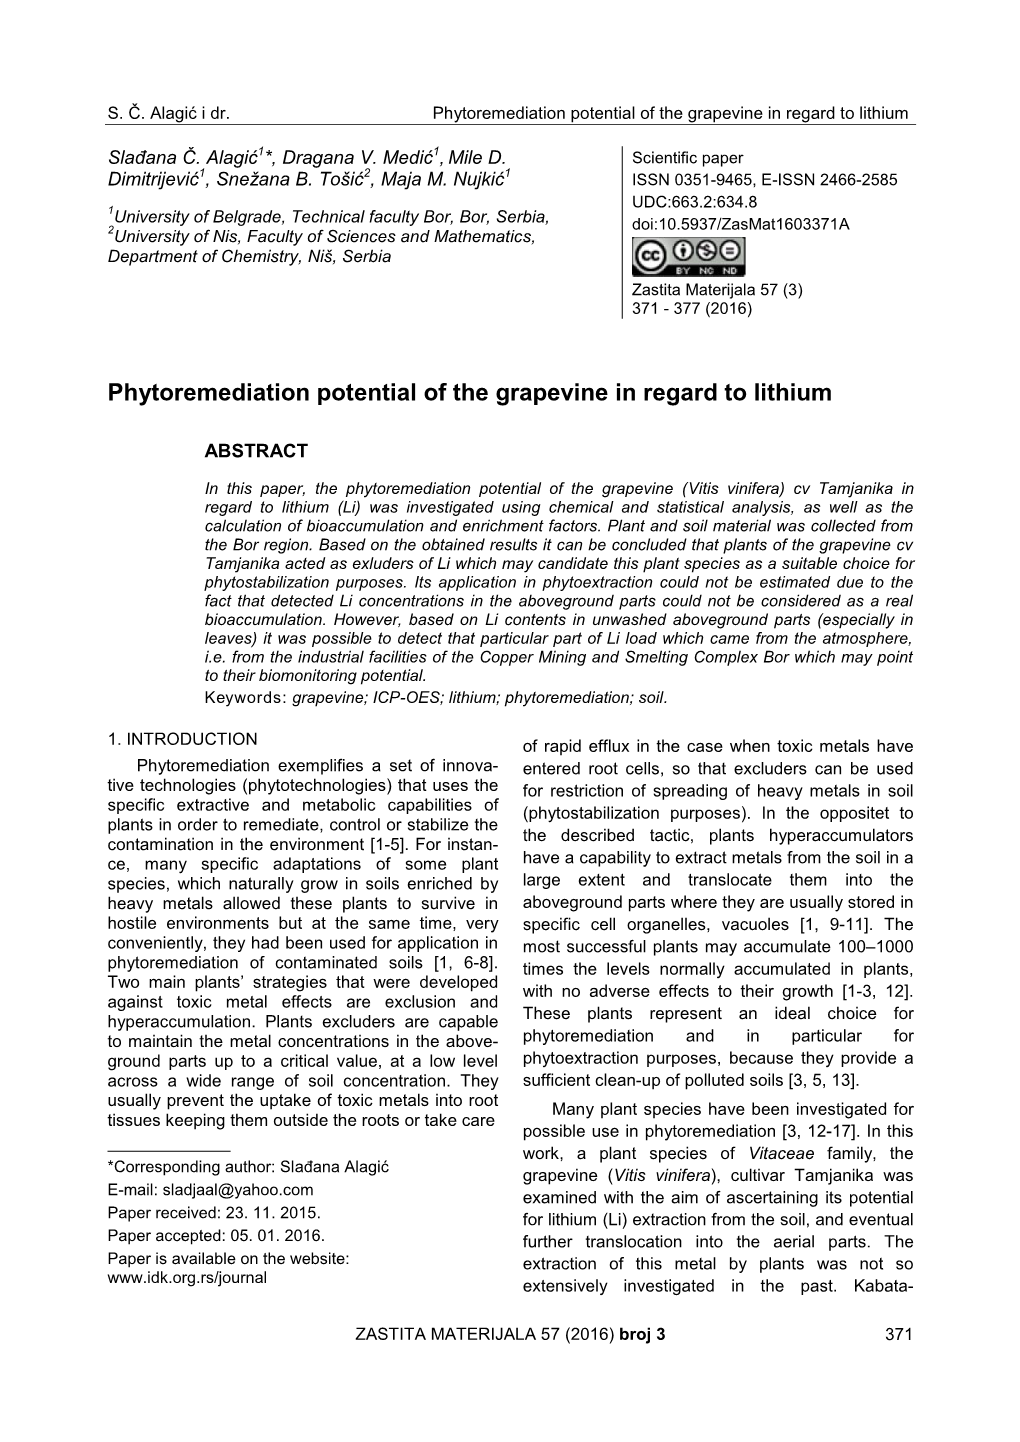 Phytoremediation Potential of the Grapevine in Regard to Lithium